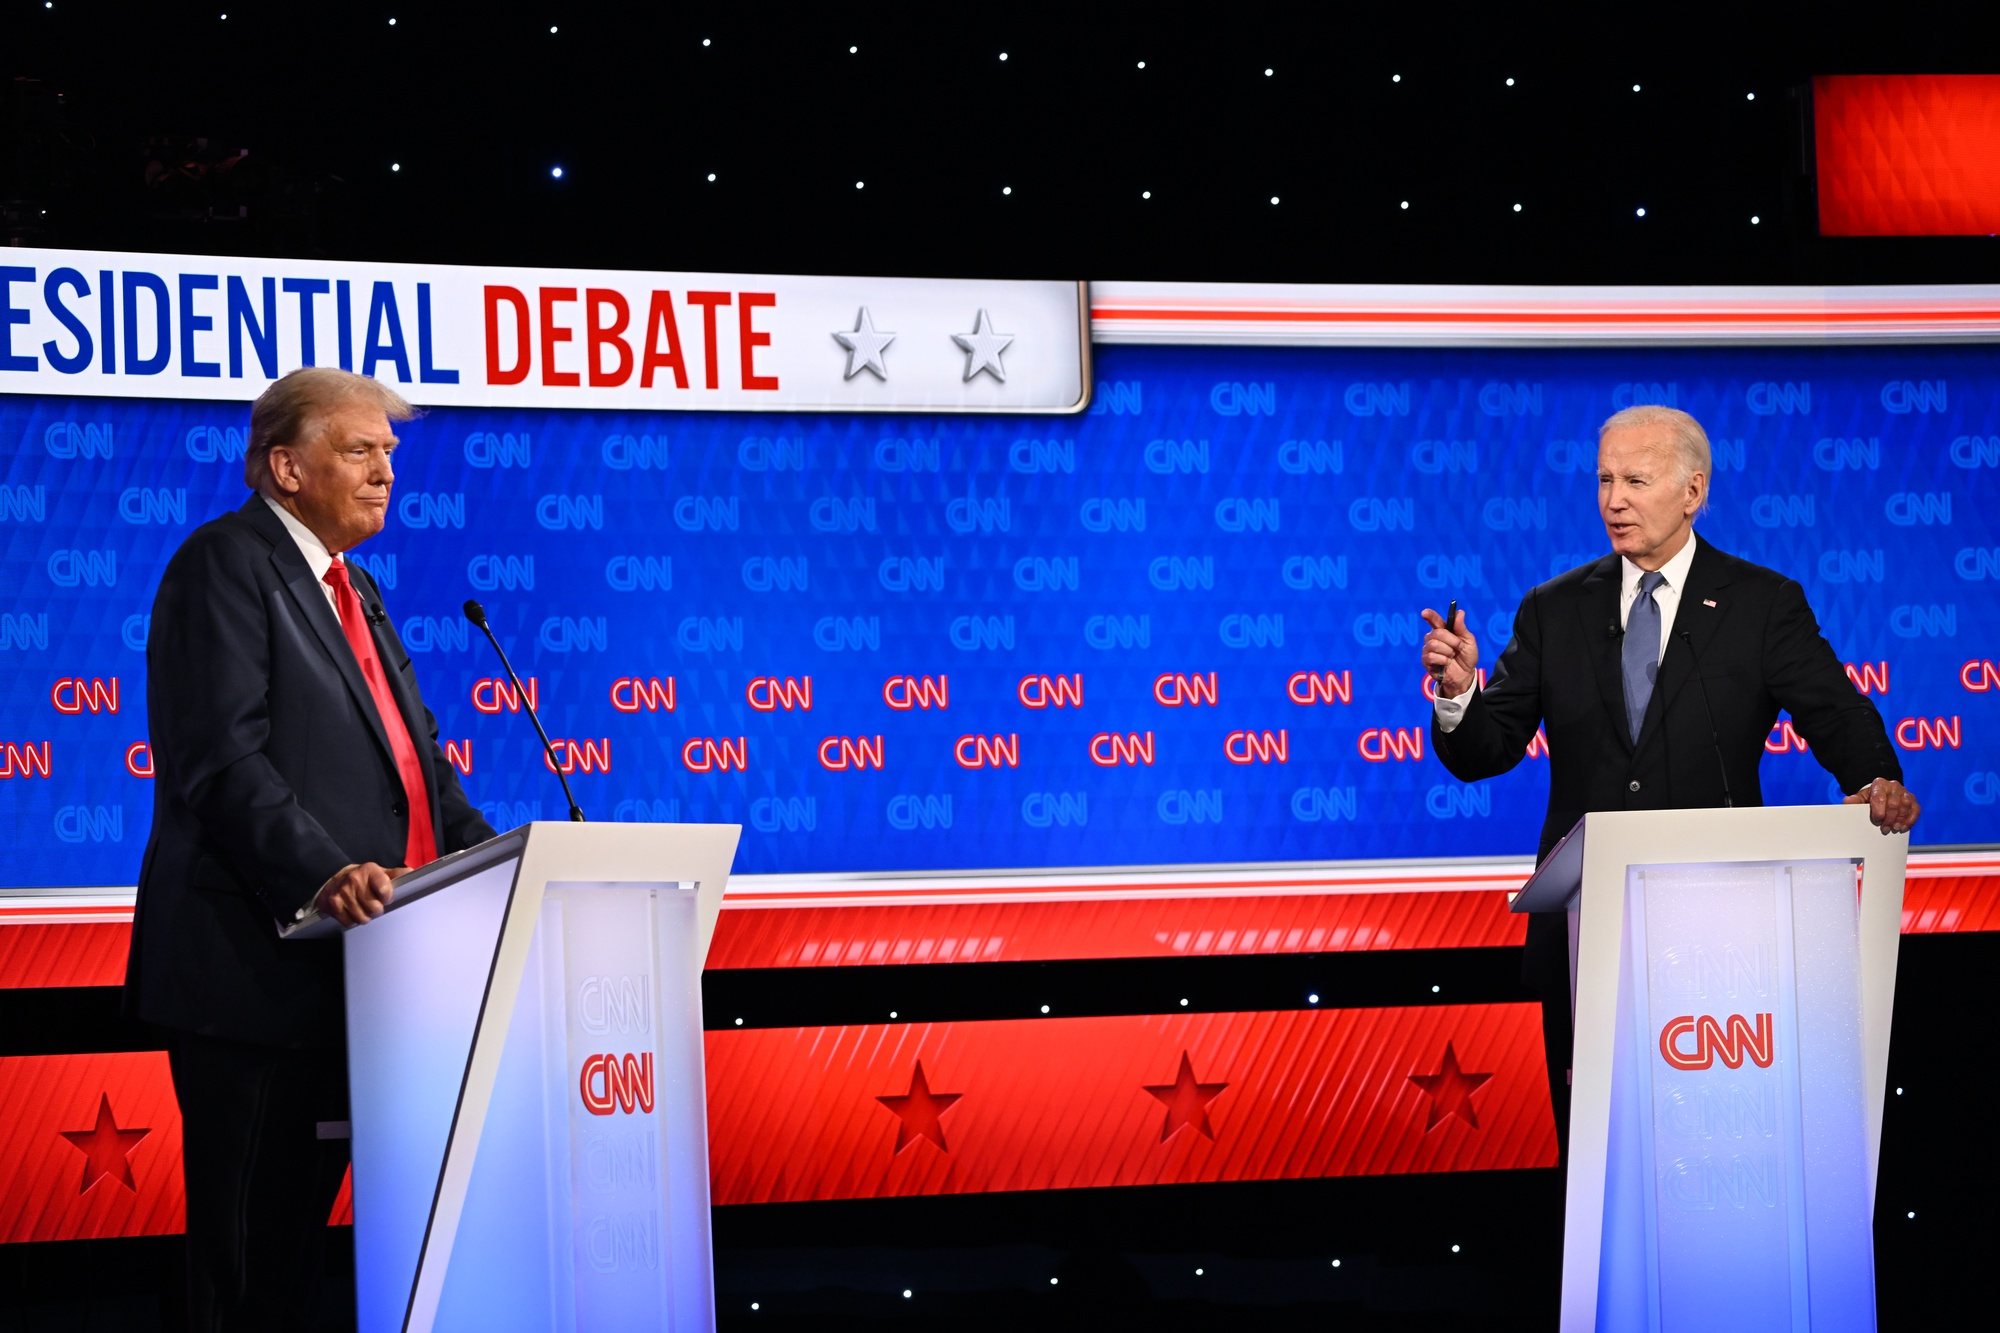 epaselect epa11442527 US President Joe Biden (R) and former US President Donald J. Trump (L) participate in the first 2024 presidential election debate, at Georgia Institute of Technology’s McCamish Pavilion in Atlanta, Georgia, USA, 27 June 2024. The first 2024 presidential election debate is hosted by CNN.  EPA/WILL LANZONI / CNN PHOTOS MANDATORY CREDIT: CNN PHOTOS / CREDIT CNN - WILL LANZONI   EDITORIAL USE ONLY  EDITORIAL USE ONLY